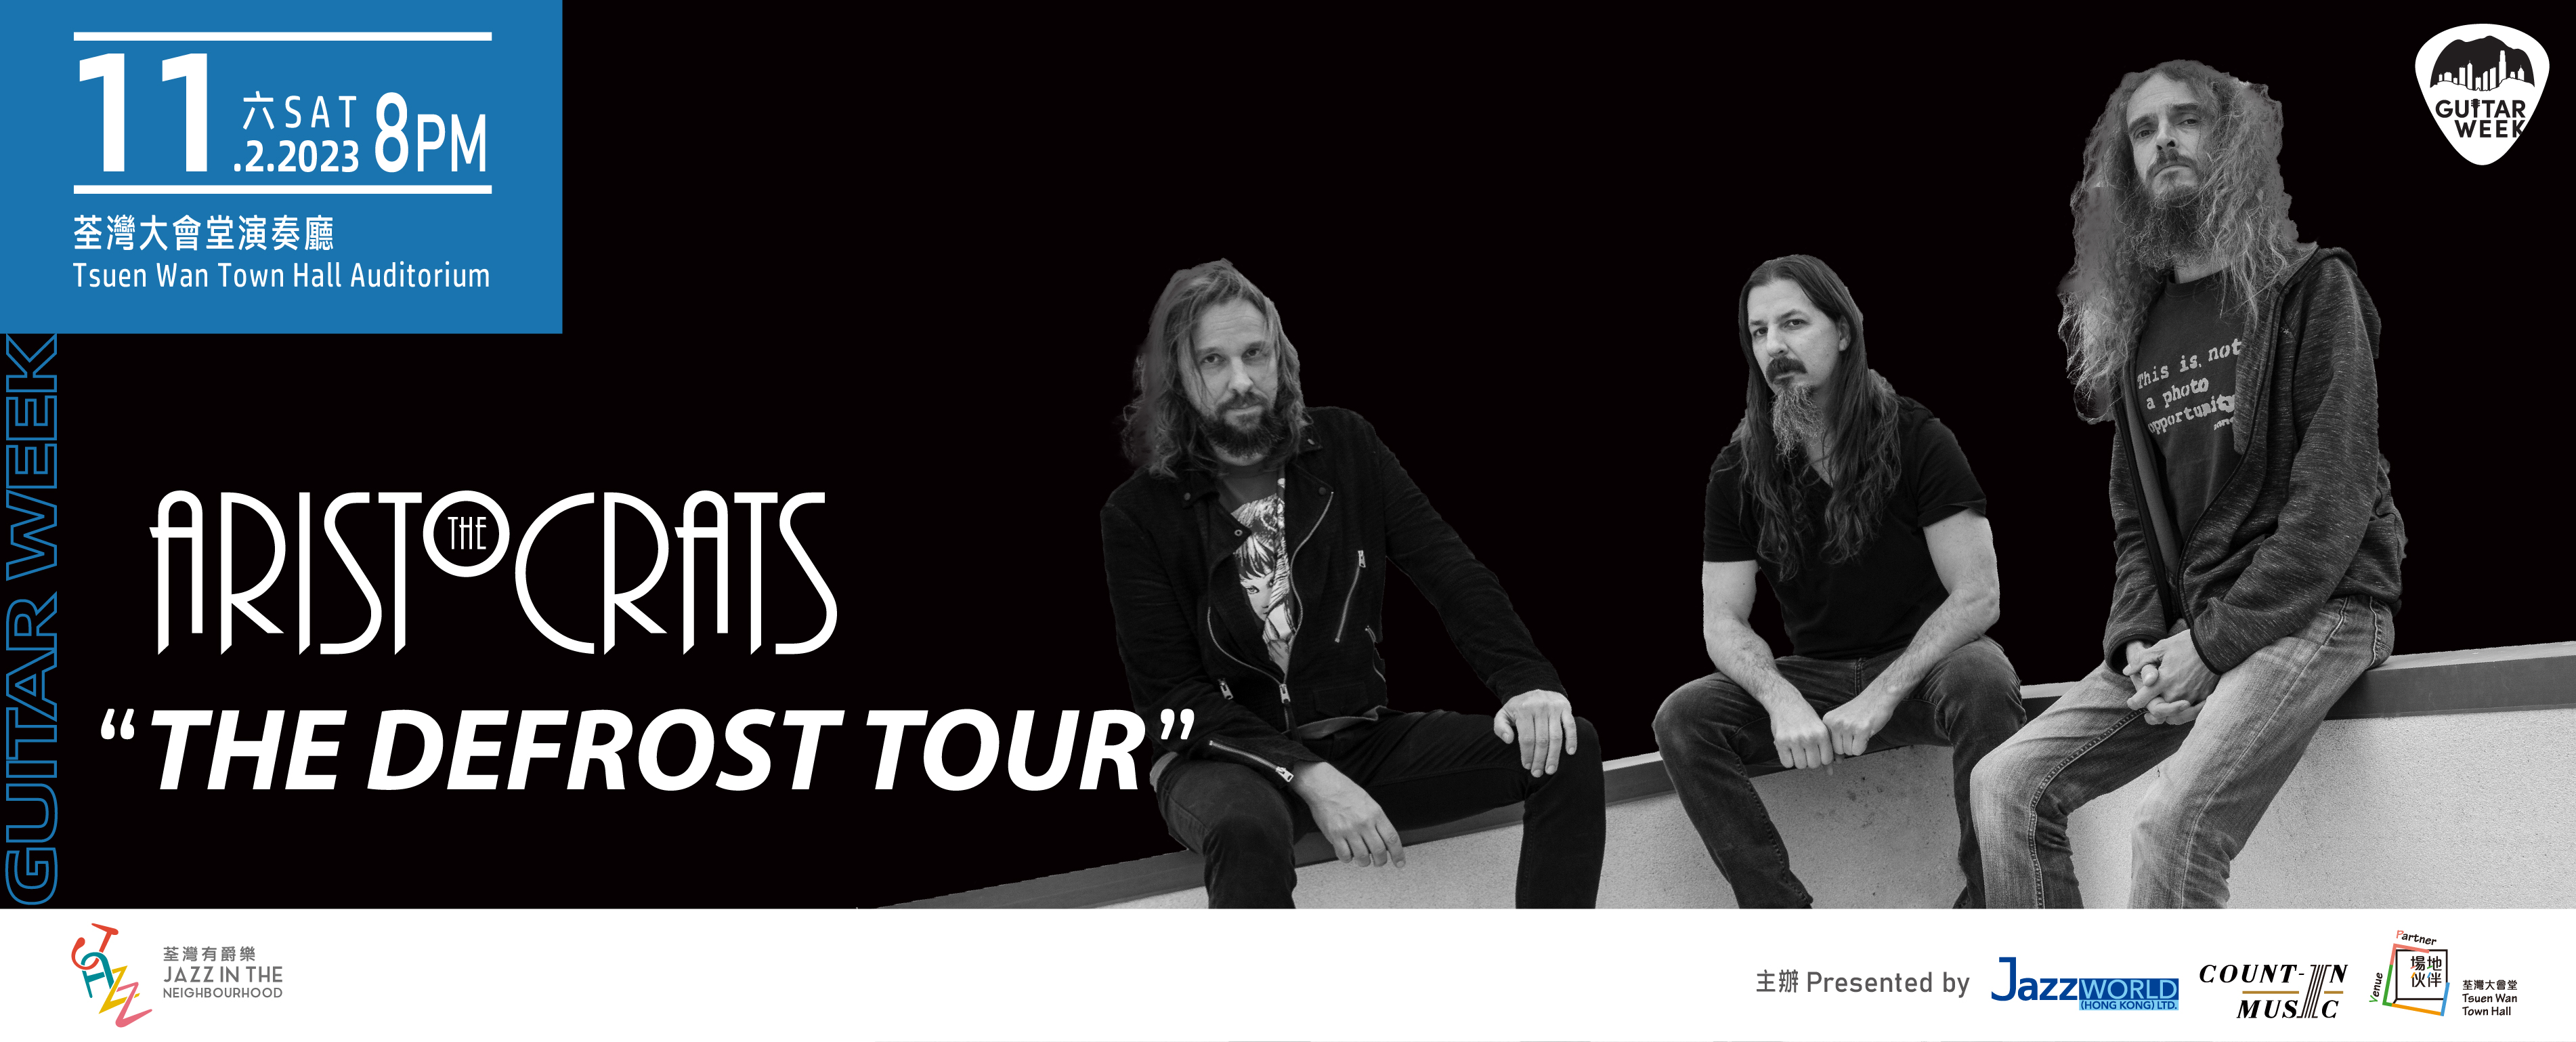 Guitar Week: The Aristocrats “THE DEFROST TOUR”